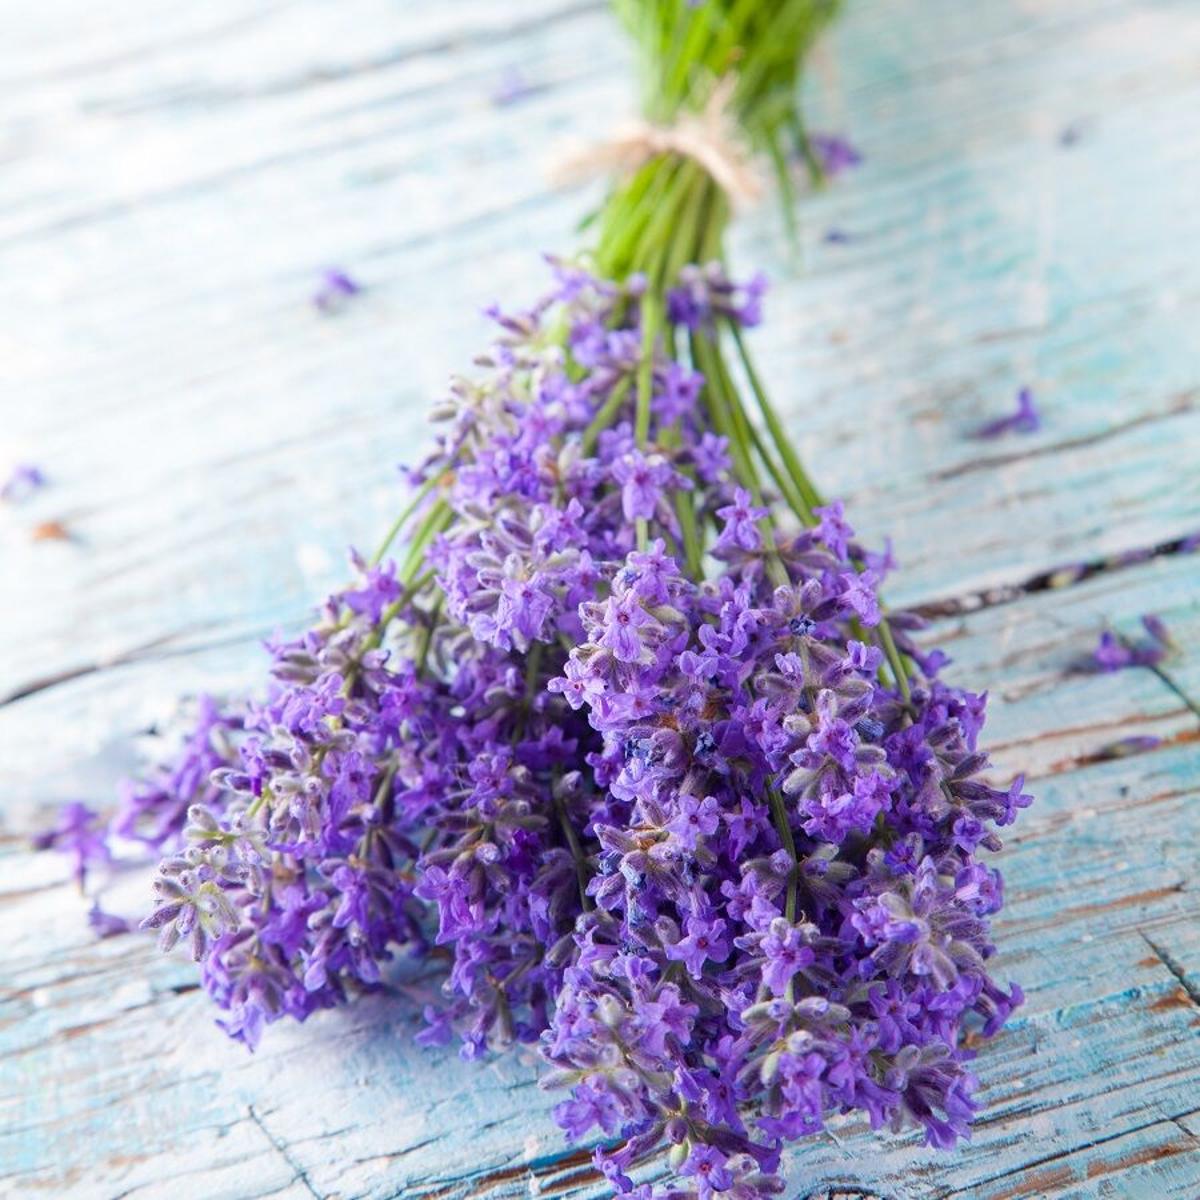 Lavender farms: Wisconsin farmers find uses for aromatic, edible herb